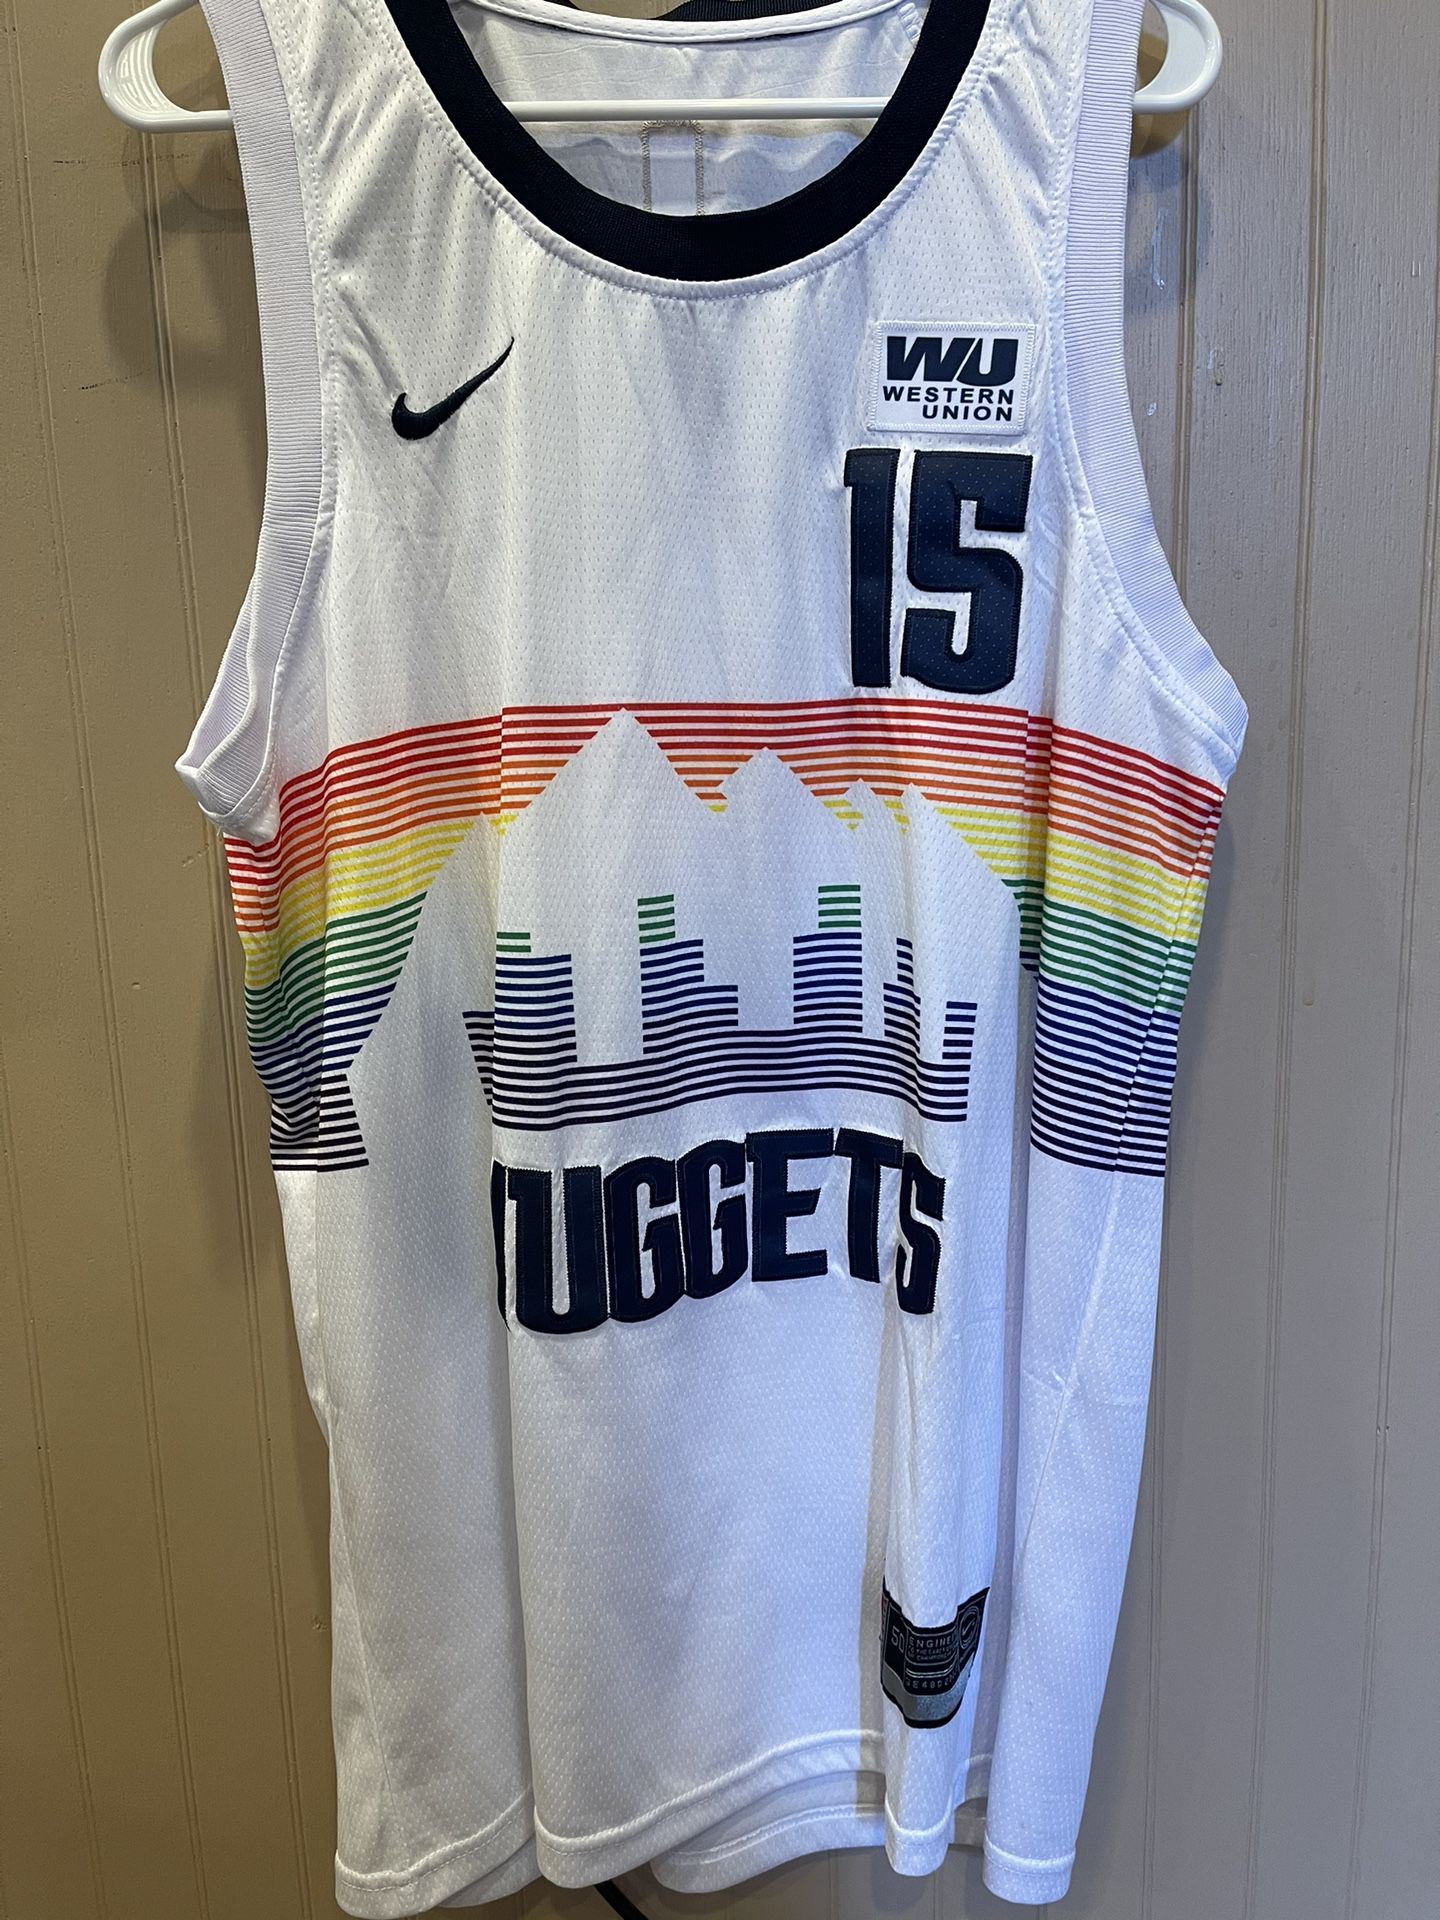 NIKOLA JOKIC DENVER NUGGETS NIKE JERSEY BRAND NEW WITH TAGS SIZES MEDIUM,  LARGE AND XL AVAILABLE for Sale in Denver, CO - OfferUp